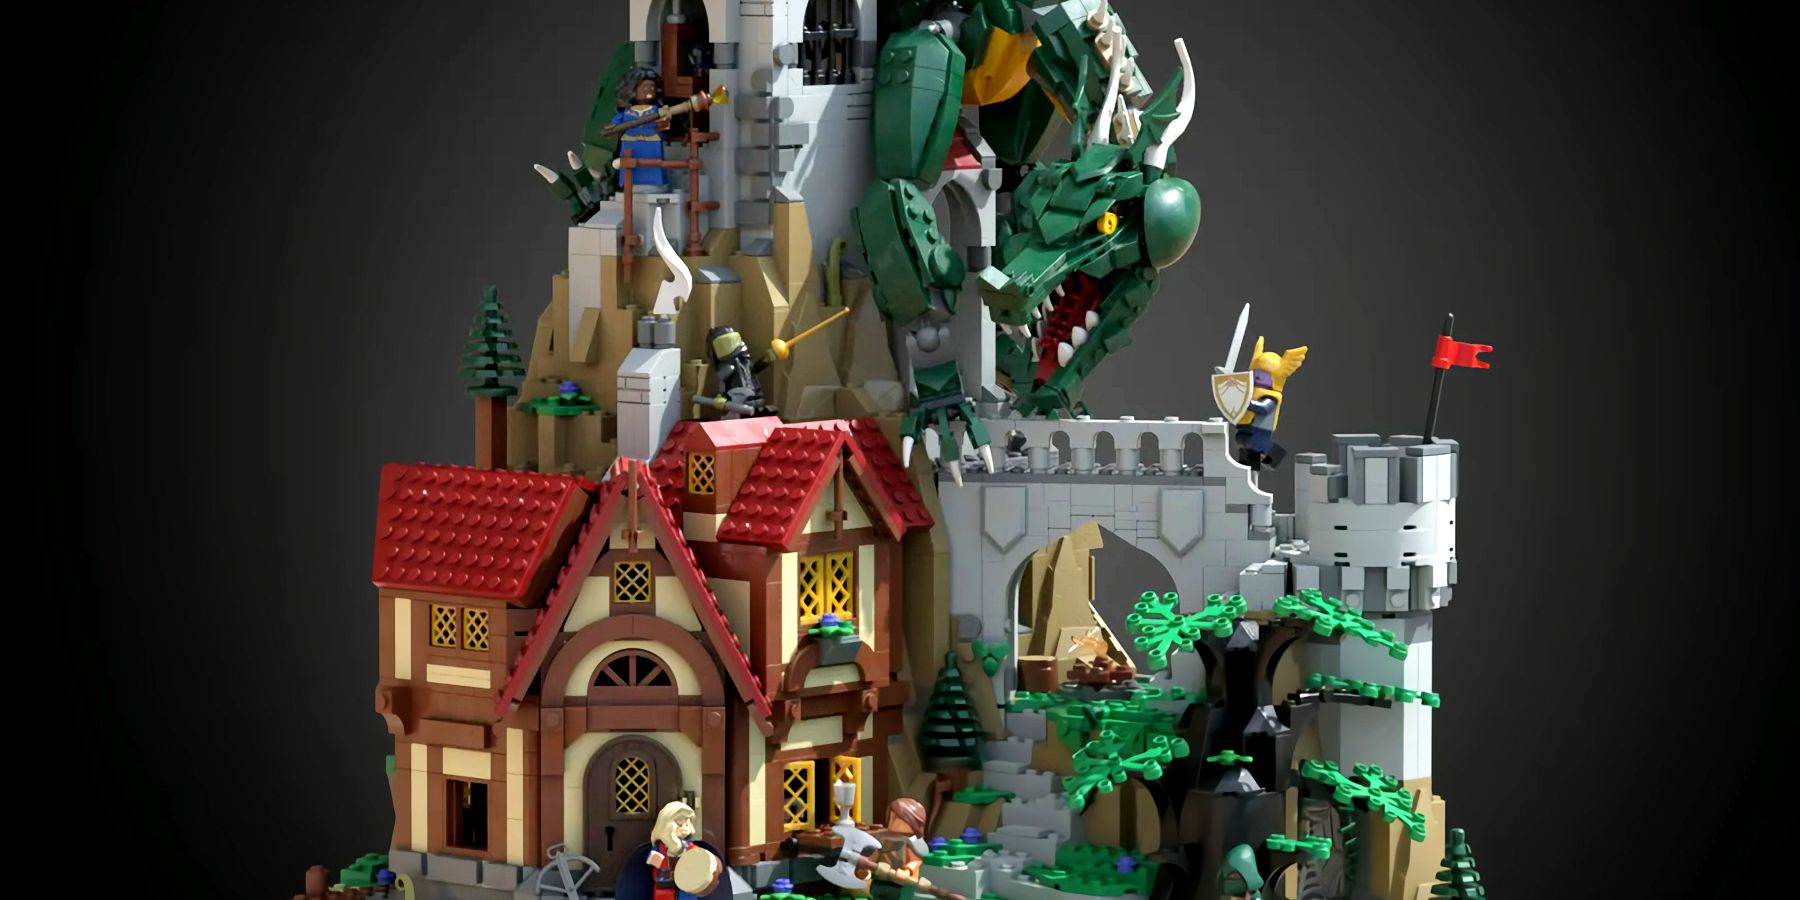 The Dragon's Keep: Journey's End LEGO Ideas set, a prototype build with a green dragon climbing on a stone tower while various LEGO adventurers fight it.